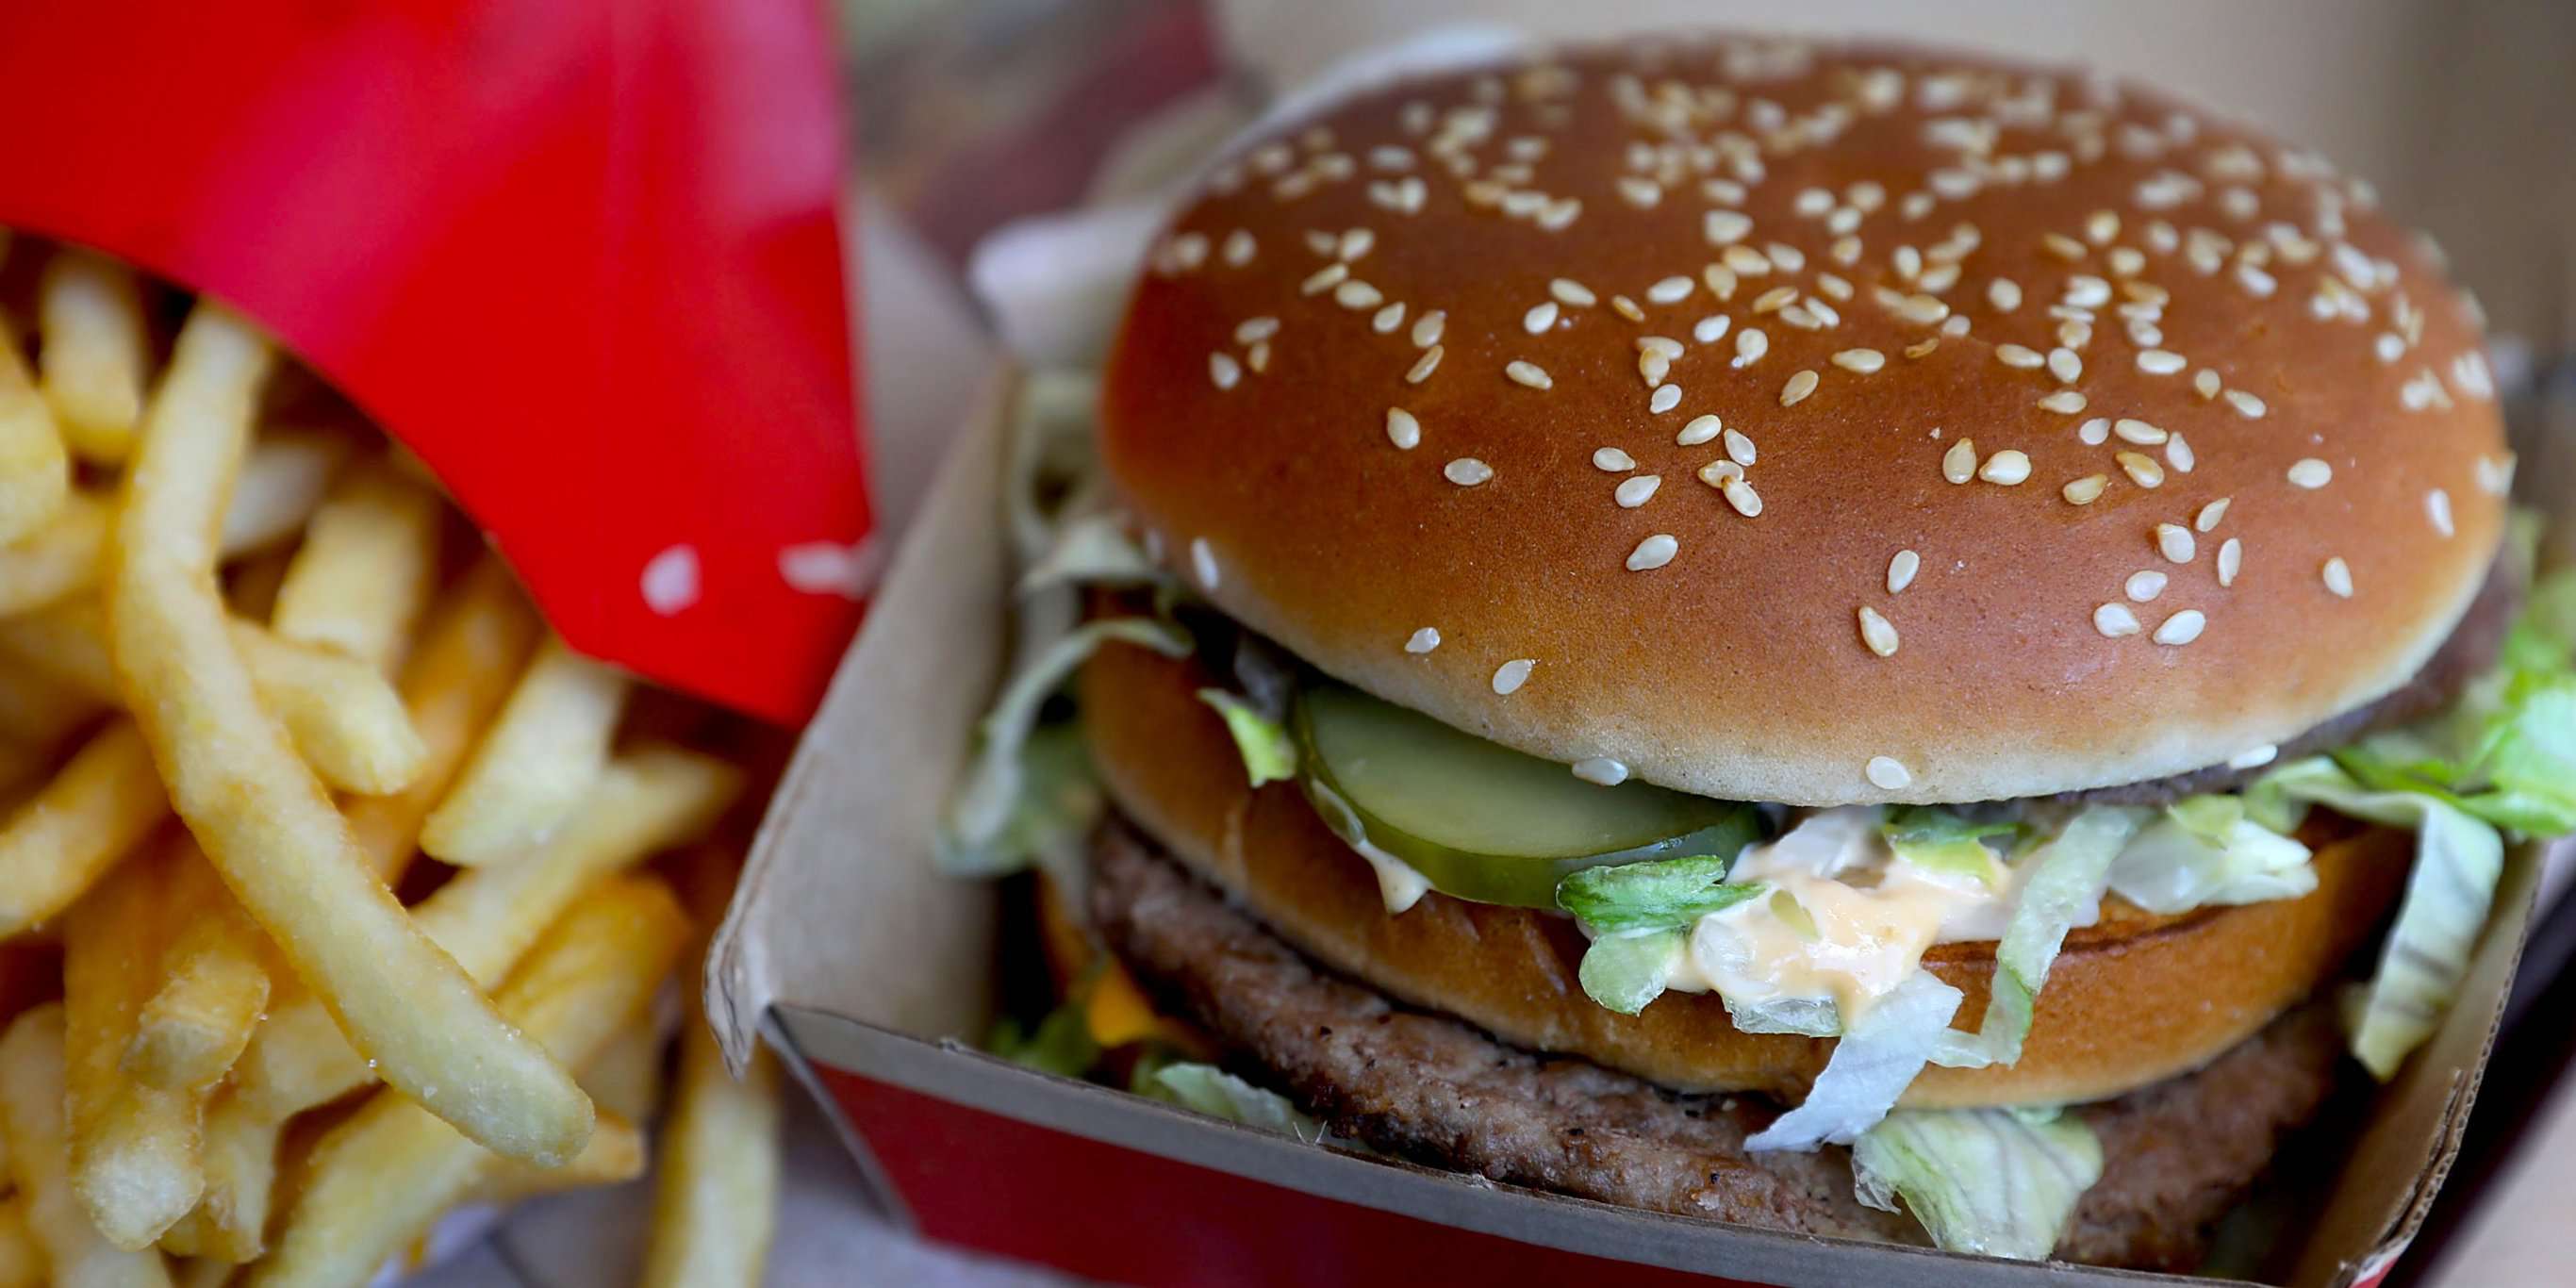 Taboola Ad Example 63733 - We Tried The World's Most Expensive Big Mac At A McDonald's In Switzerland